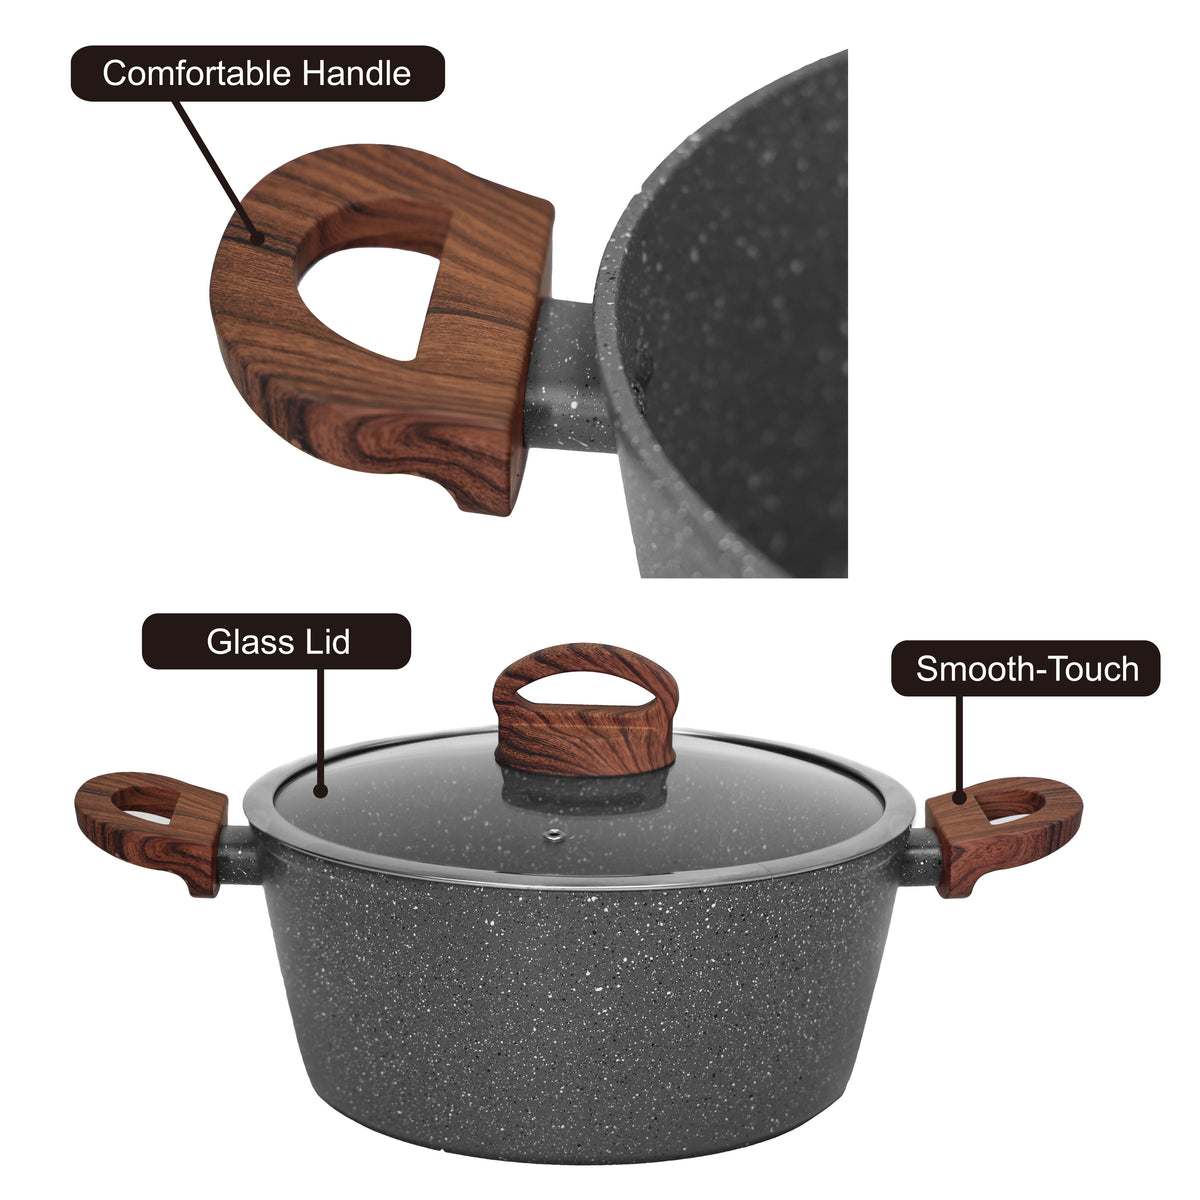 MINYIKJ Nonstick Cookware Sets - 6 Piece High Quality Nonstick Cast  Aluminum Pots and Pans with BAKELITE Handles - Non-Toxic Pots with Glass  Lids - Speckled Grey with Light Wood Handles 